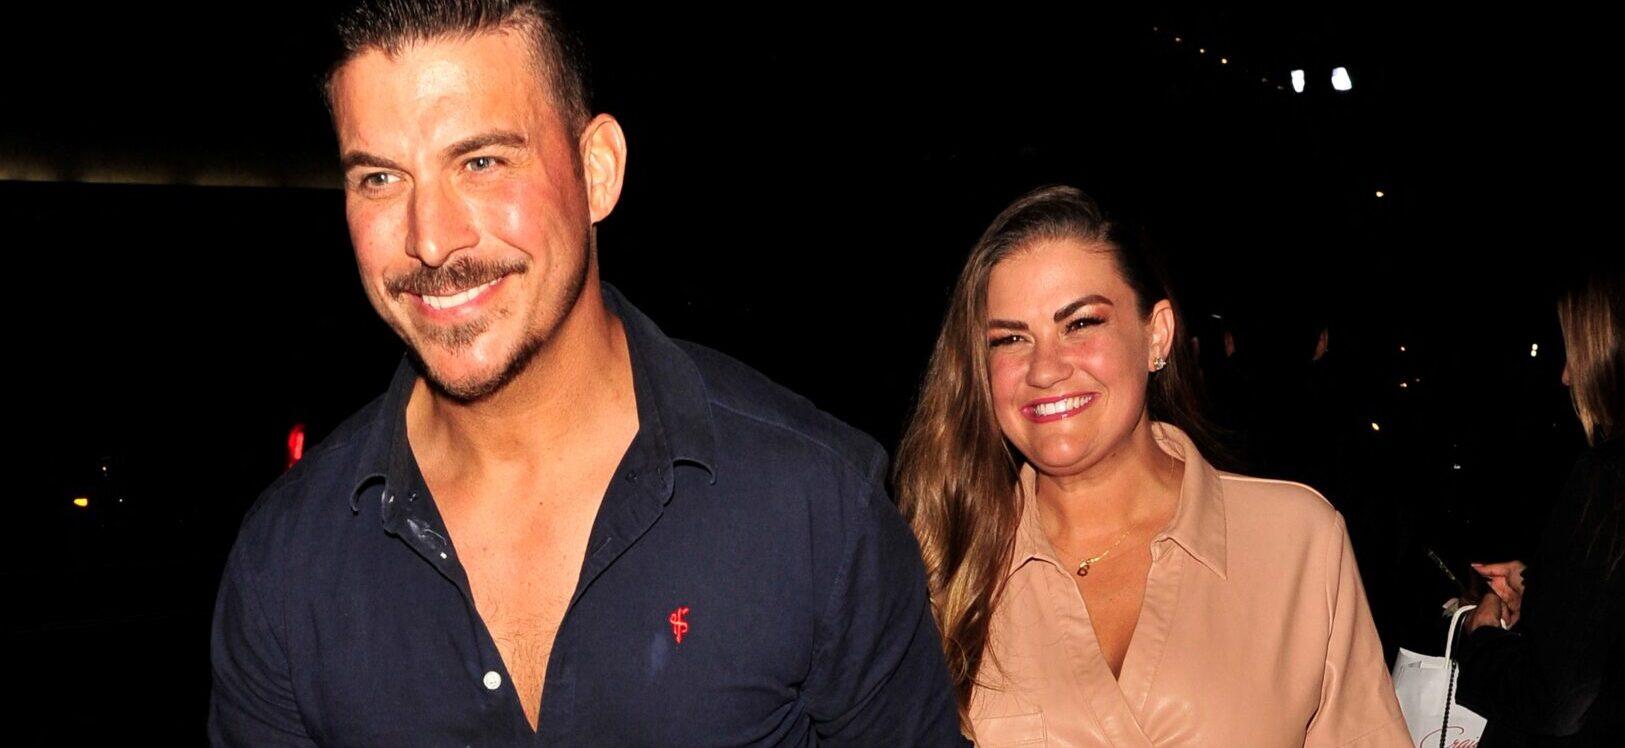 Jax Taylor and Brittany Cartwright at Craig's for dinner